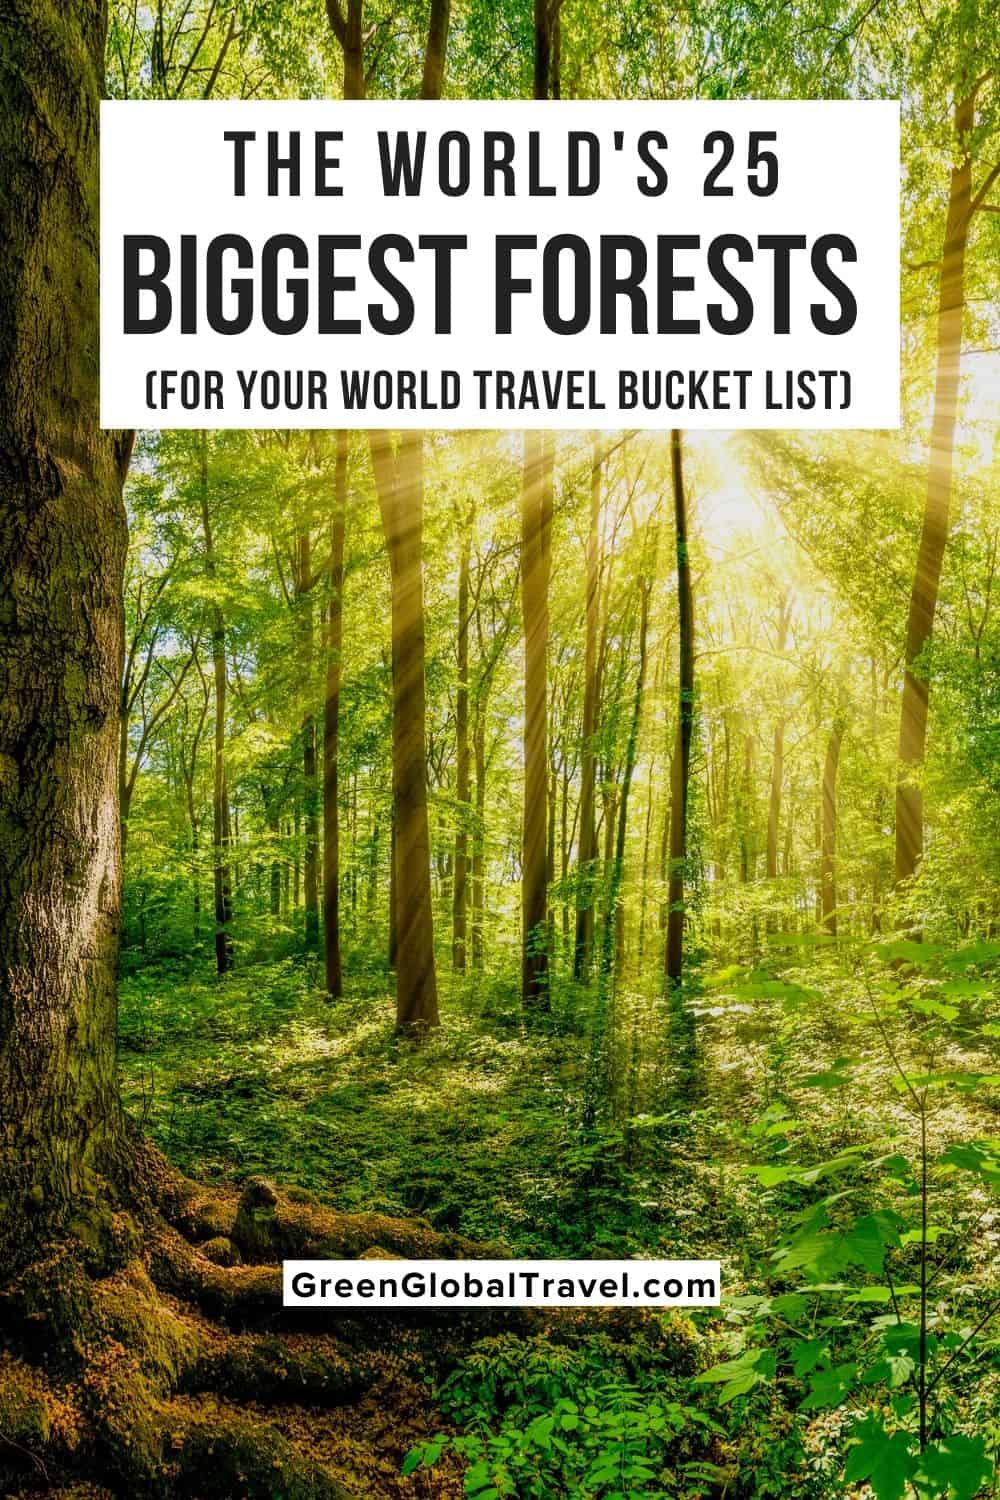 The 25 Biggest Forests (For Your World Travel Bucket List) including Forests in America, African Forests, Asian Forests, European Forests and more!